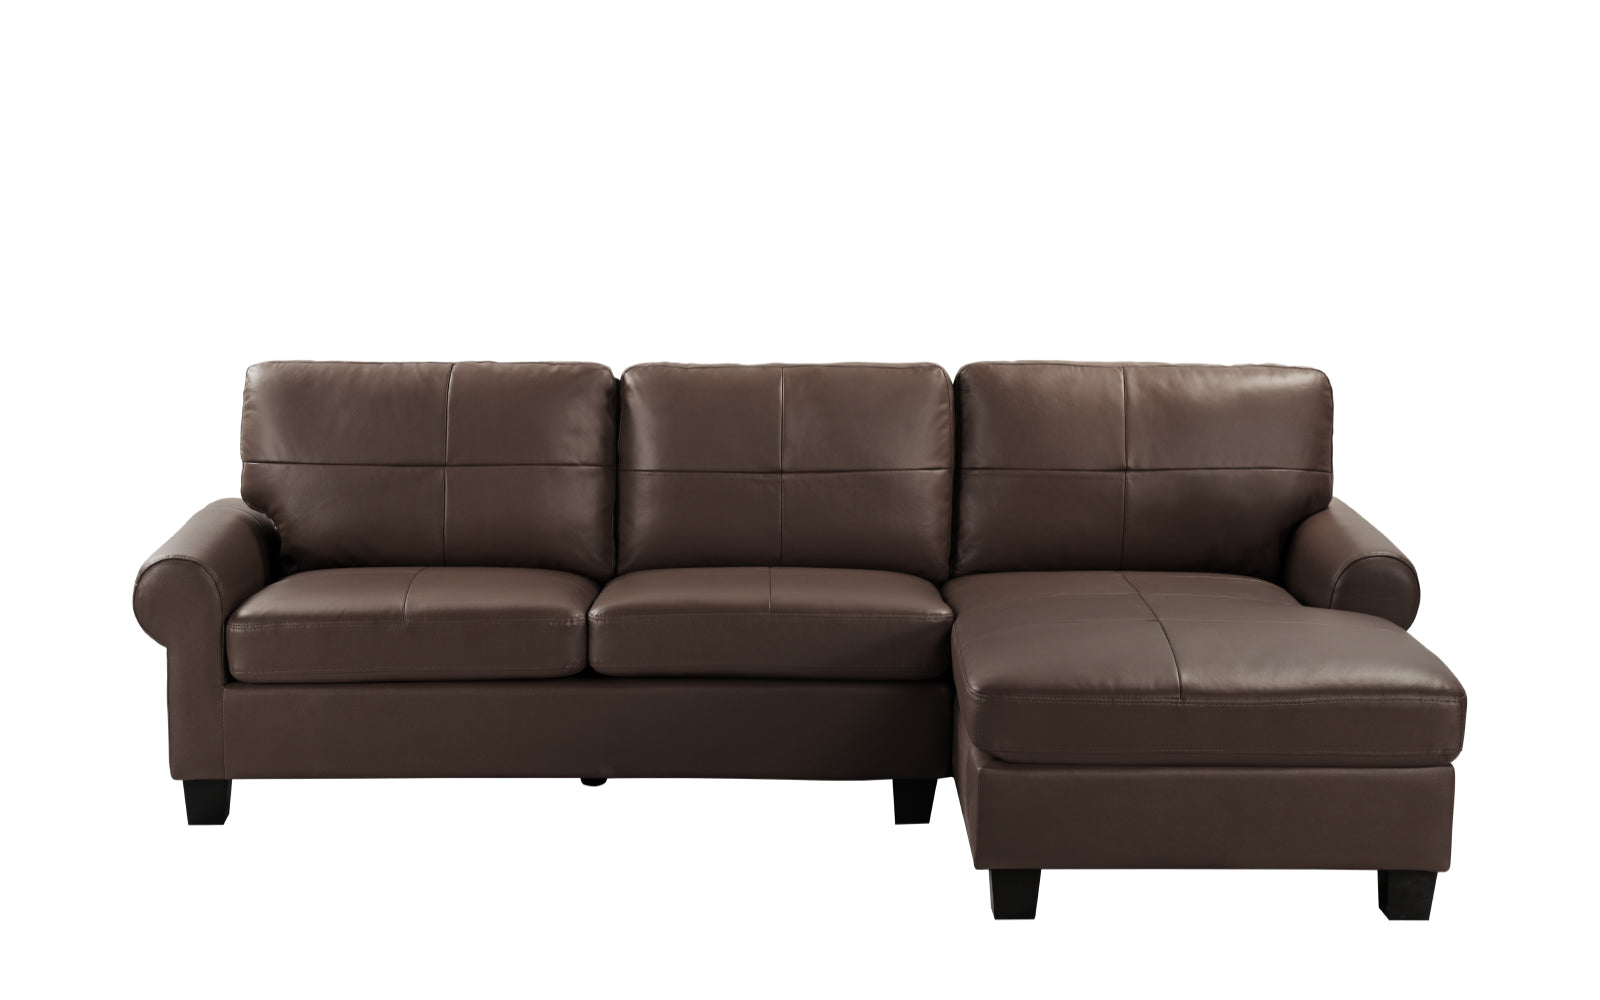 Dallas Leather Match Sectional Sofa with Right Facing Chaise